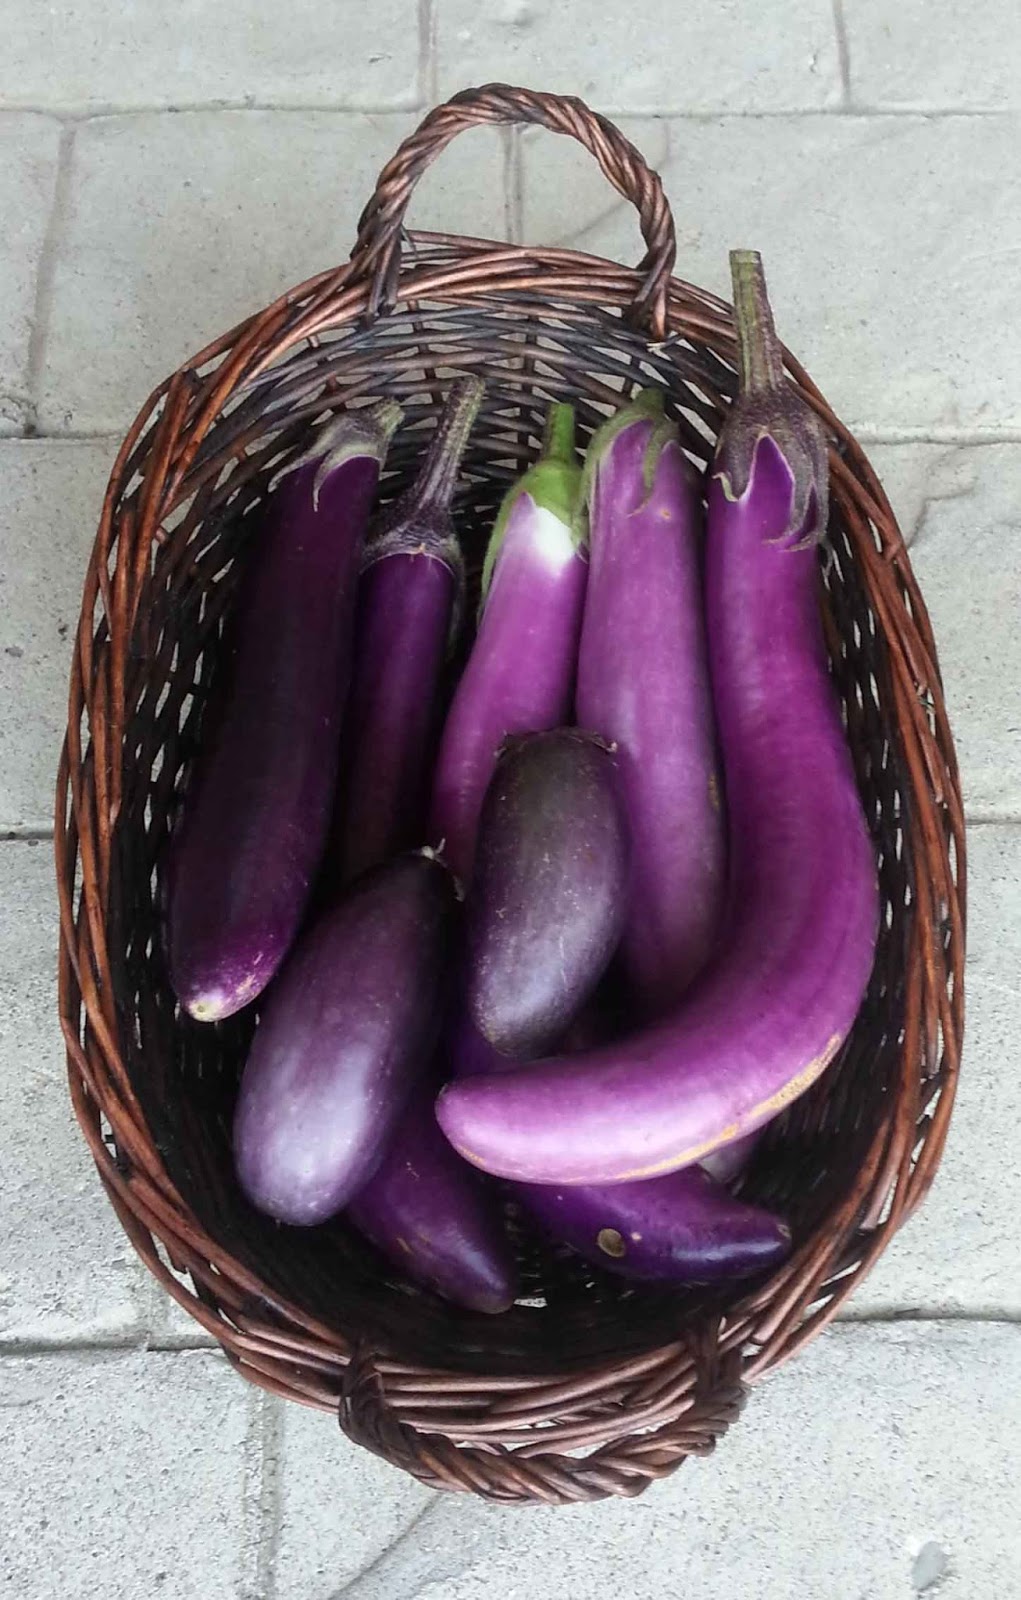 The Gardening Me: End of Season Review - Eggplants